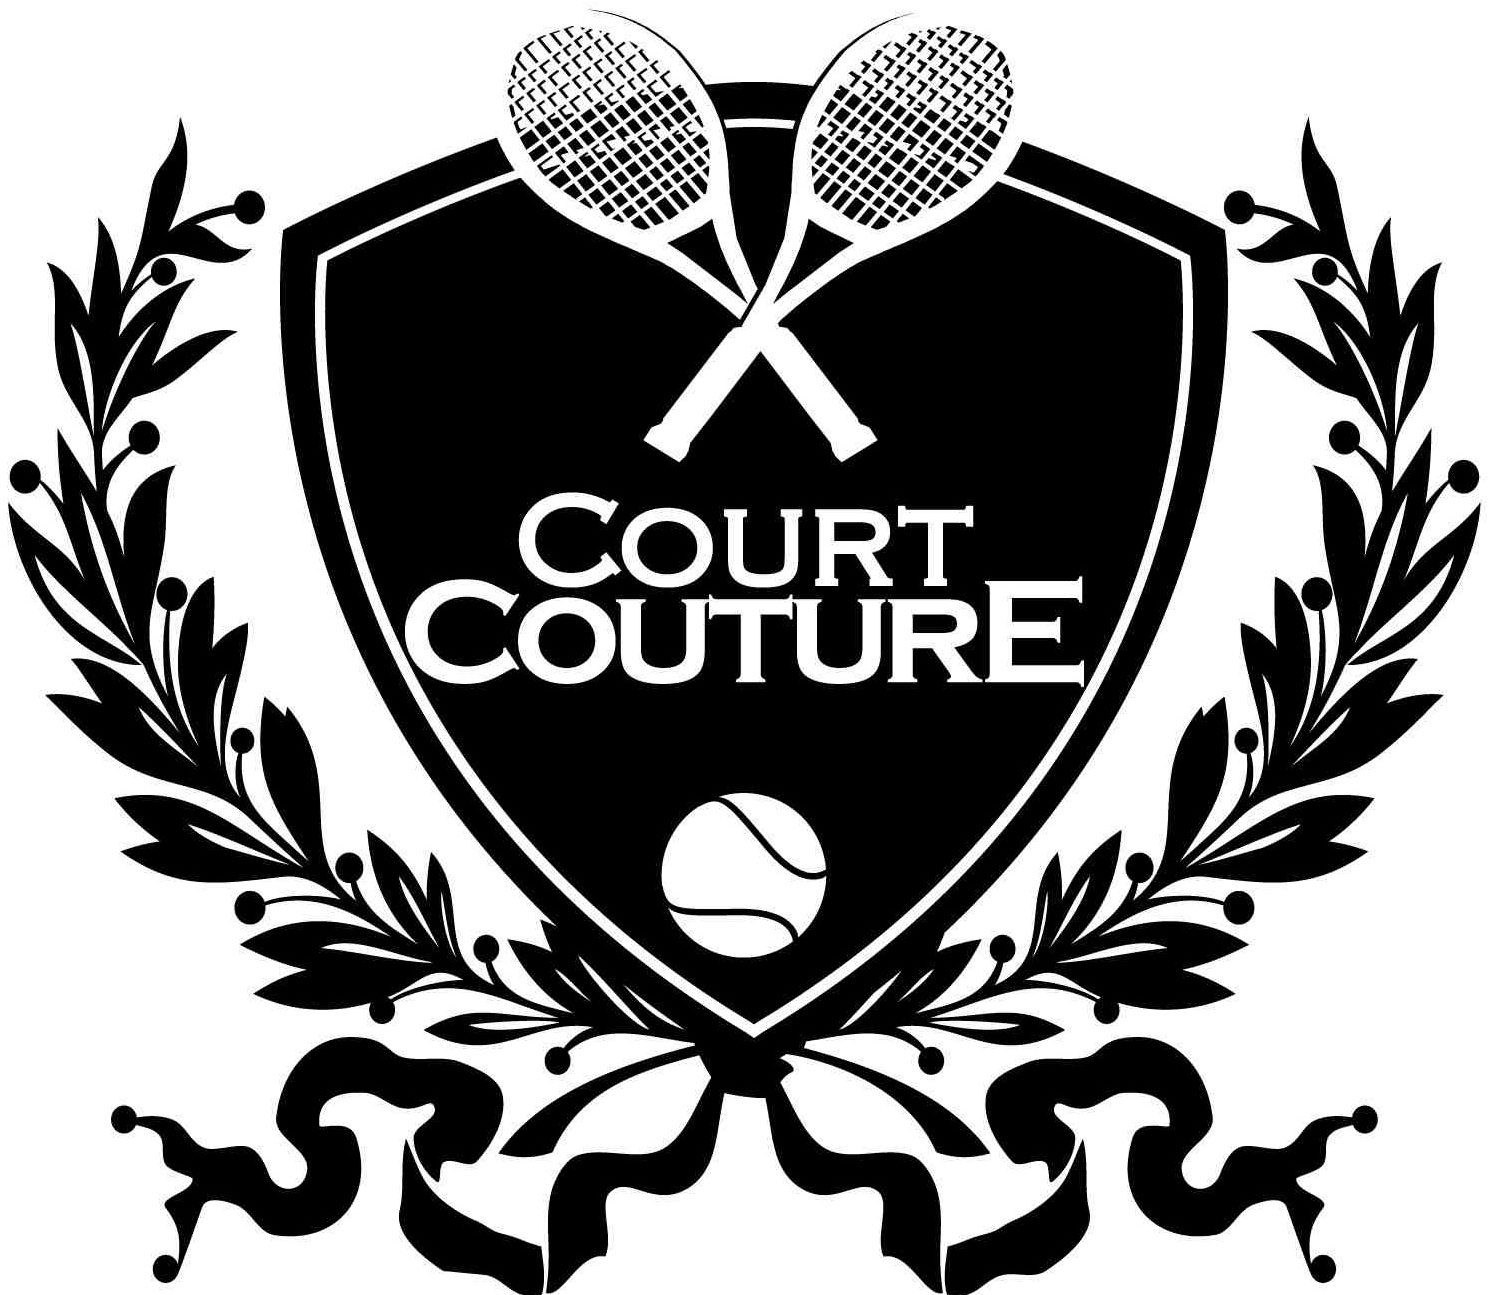 COURT COUTURE Official Website | COURT COUTURE ®